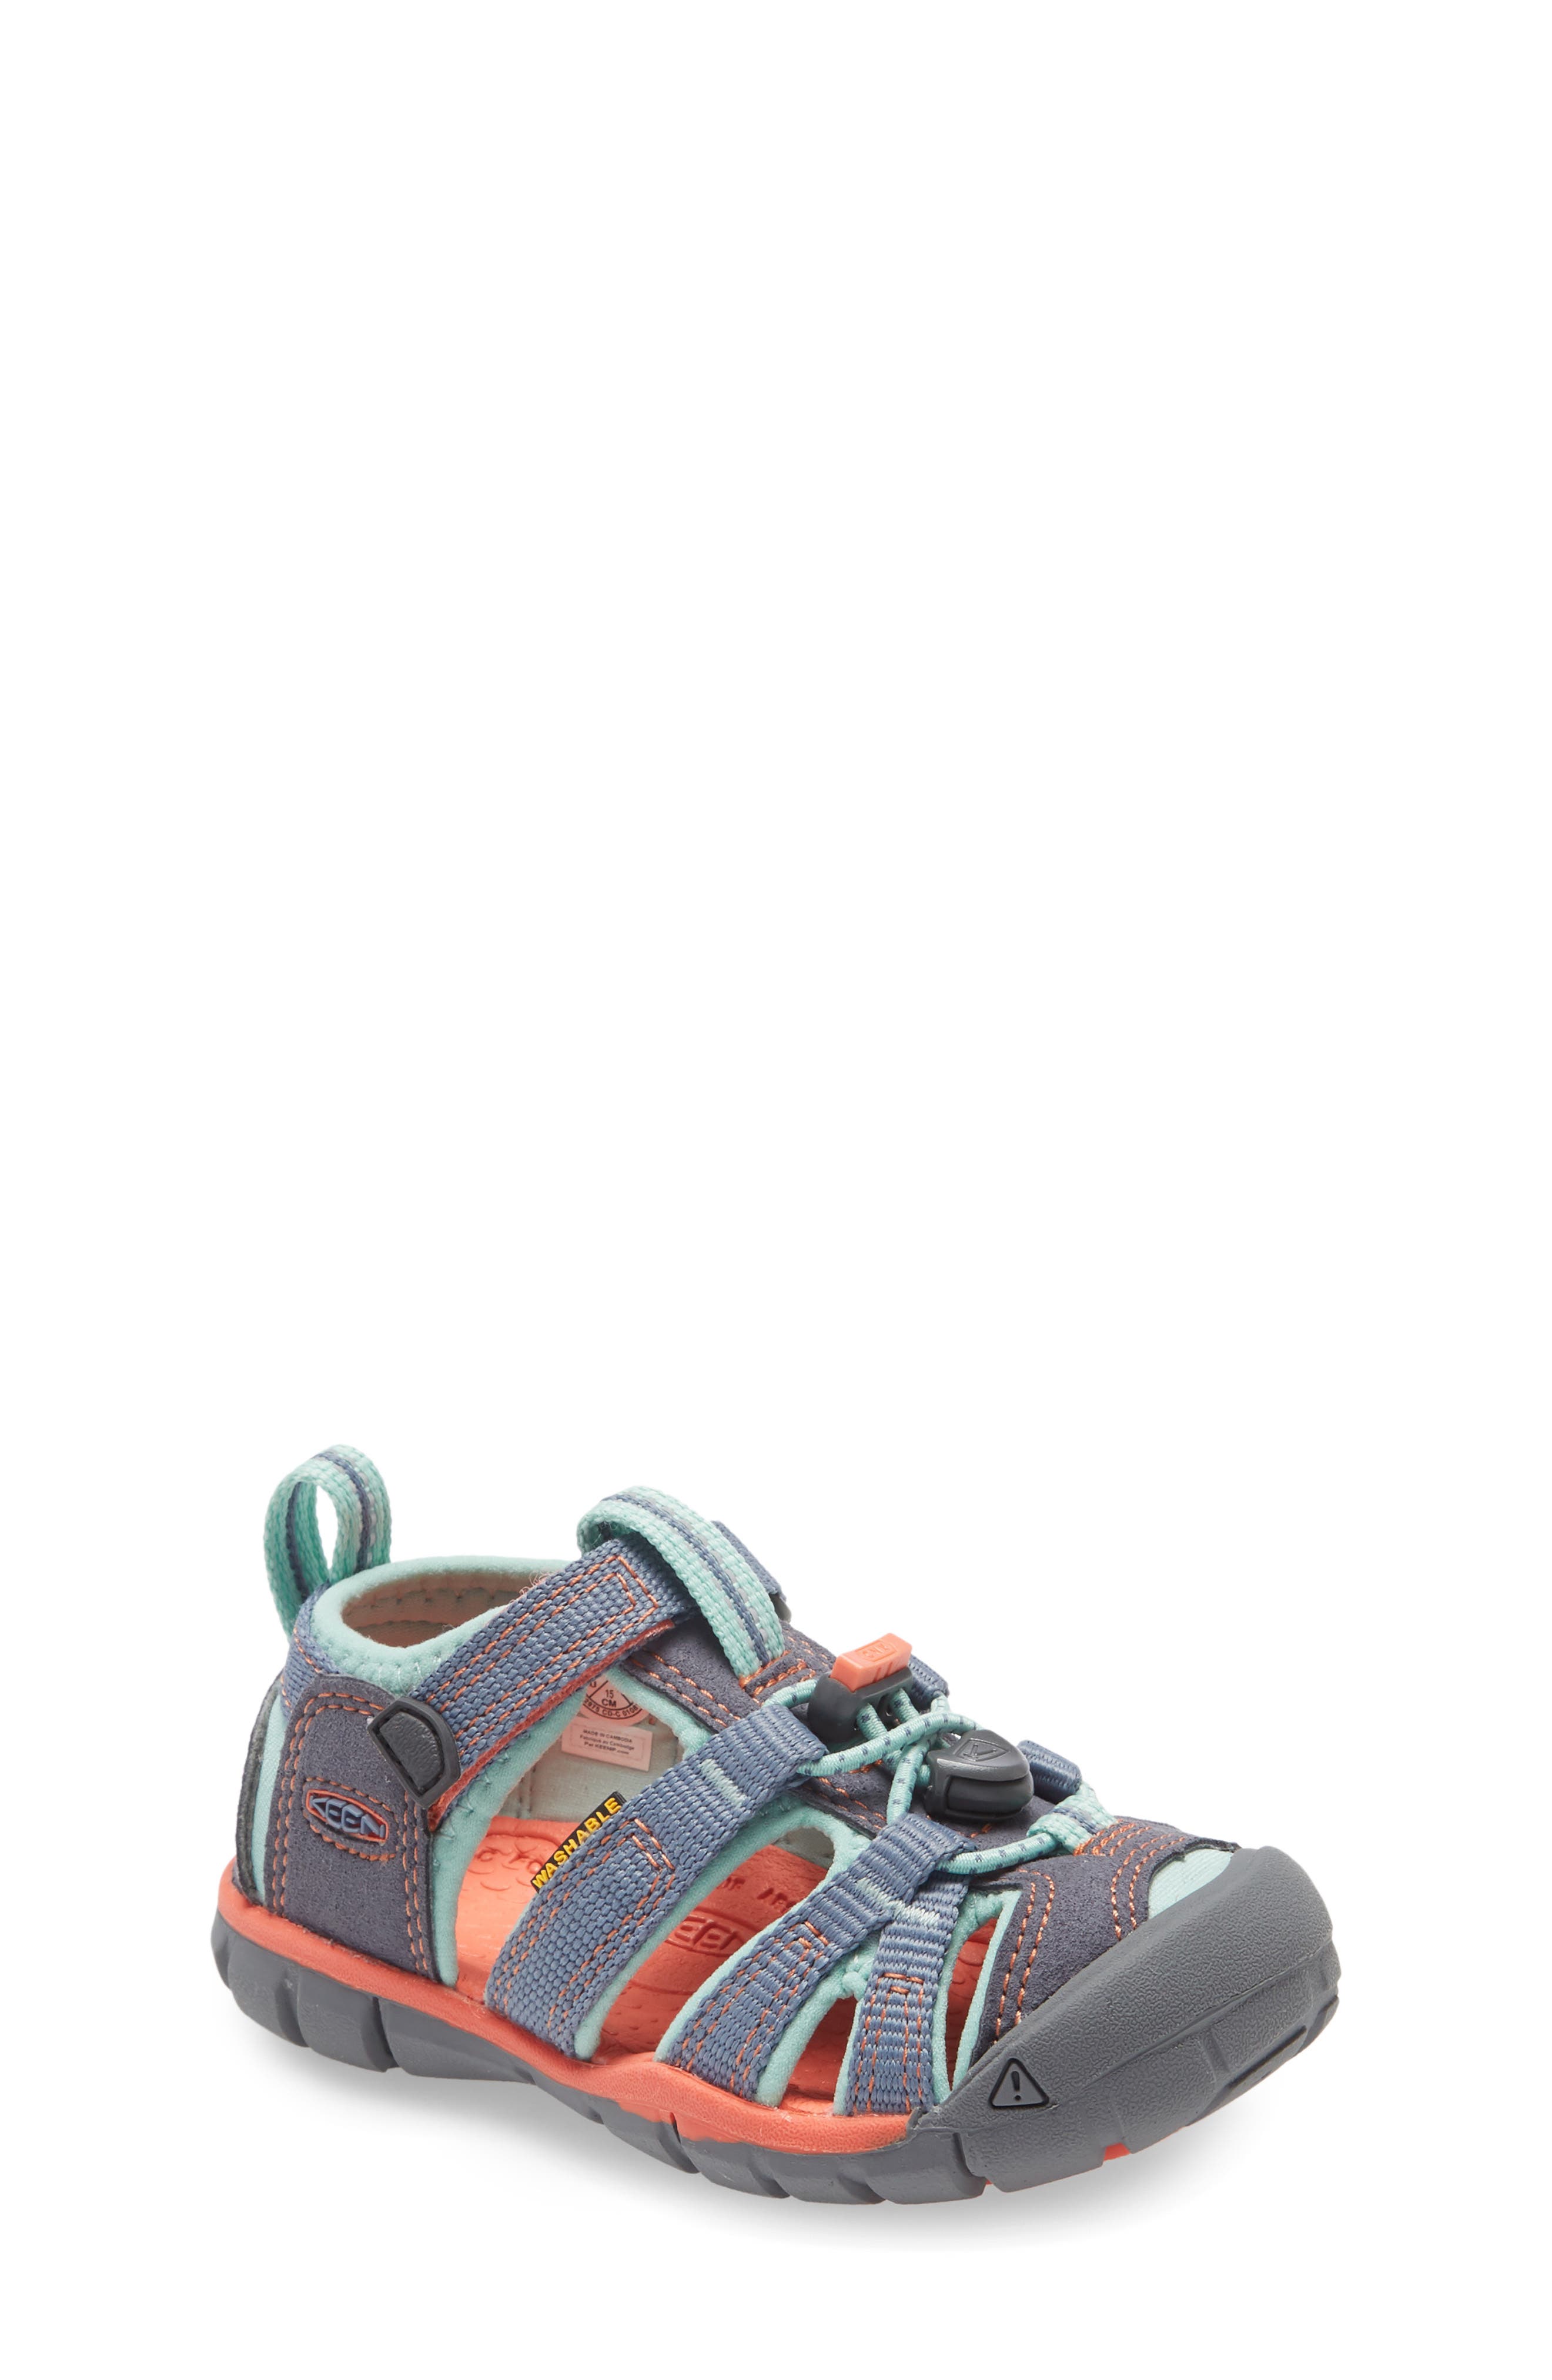 KEEN Kids Seacamp II CNX Sandal Coral/Poppy Red 5 Toddler